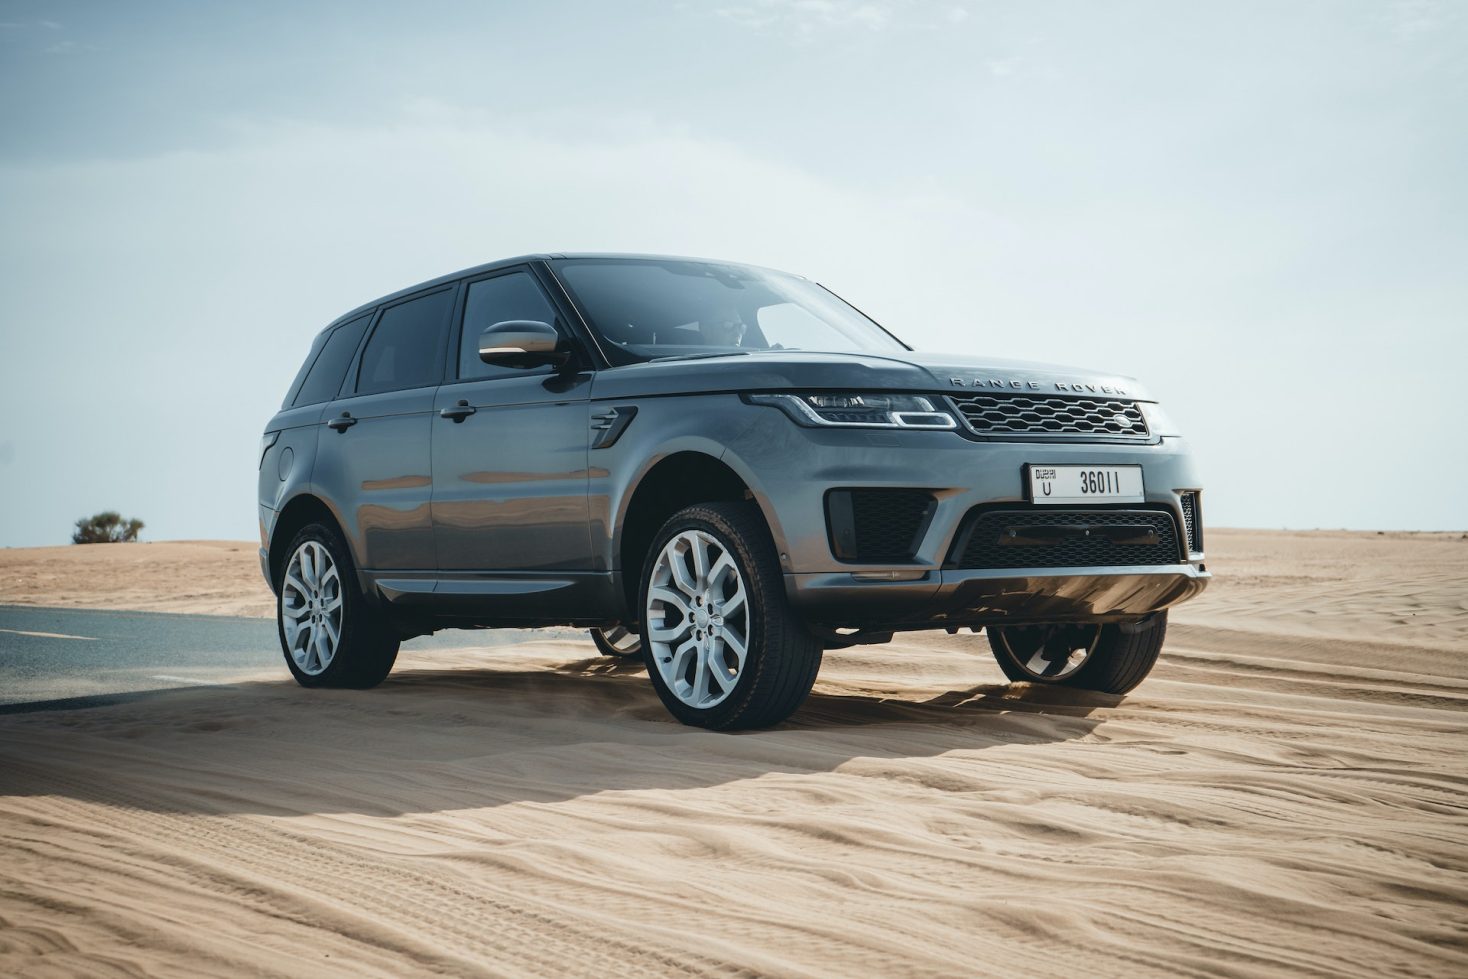 5 Tips for Effectively and Safely Driving Your SUV on Sand